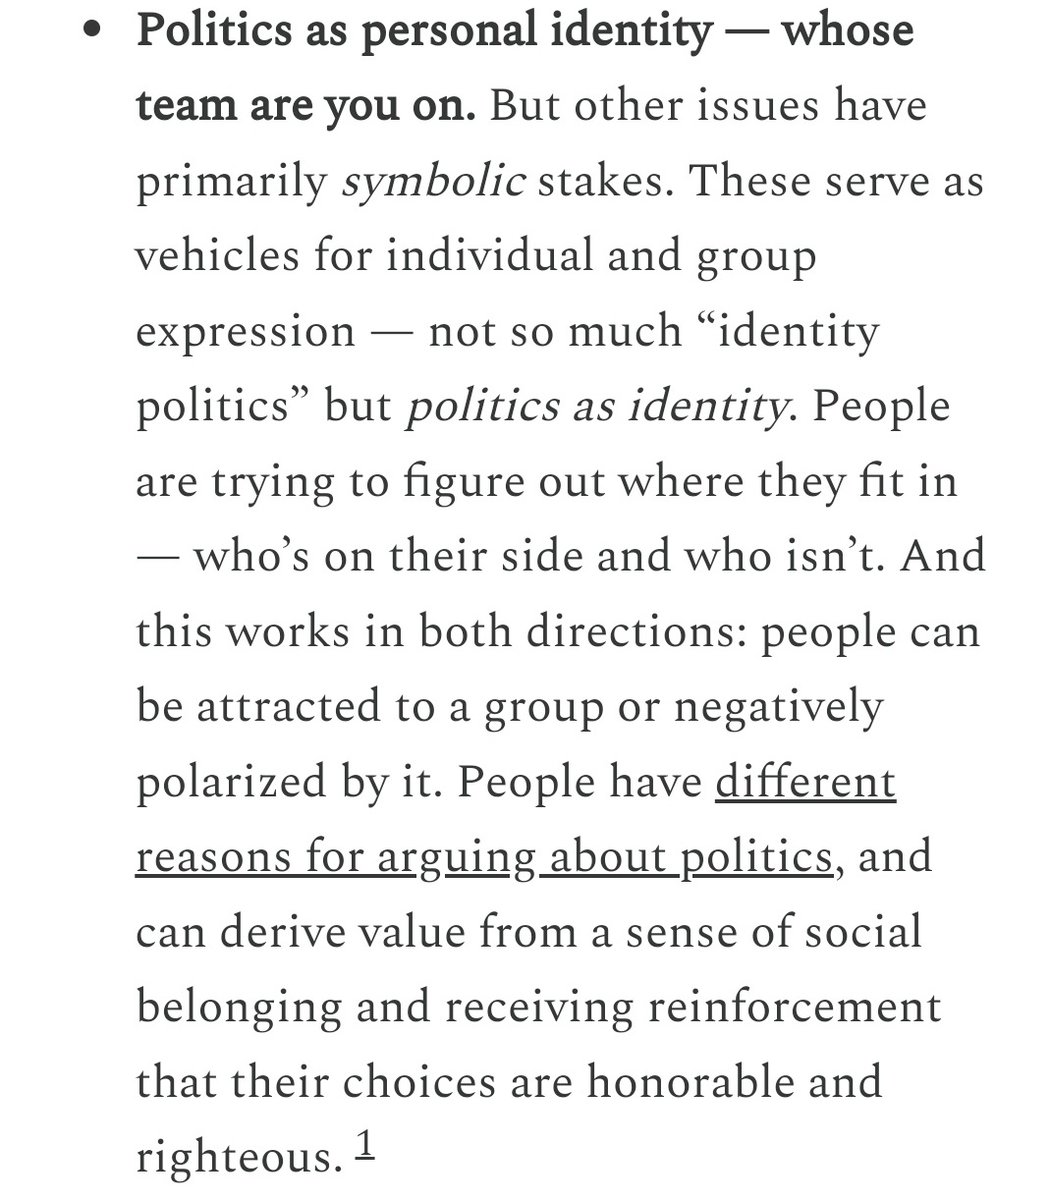 This piece from @NateSilver538 on where political beliefs come from is excellent Particularly on how political views are shaped by which group people want to identify with or against natesilver.net/p/for-most-peo…